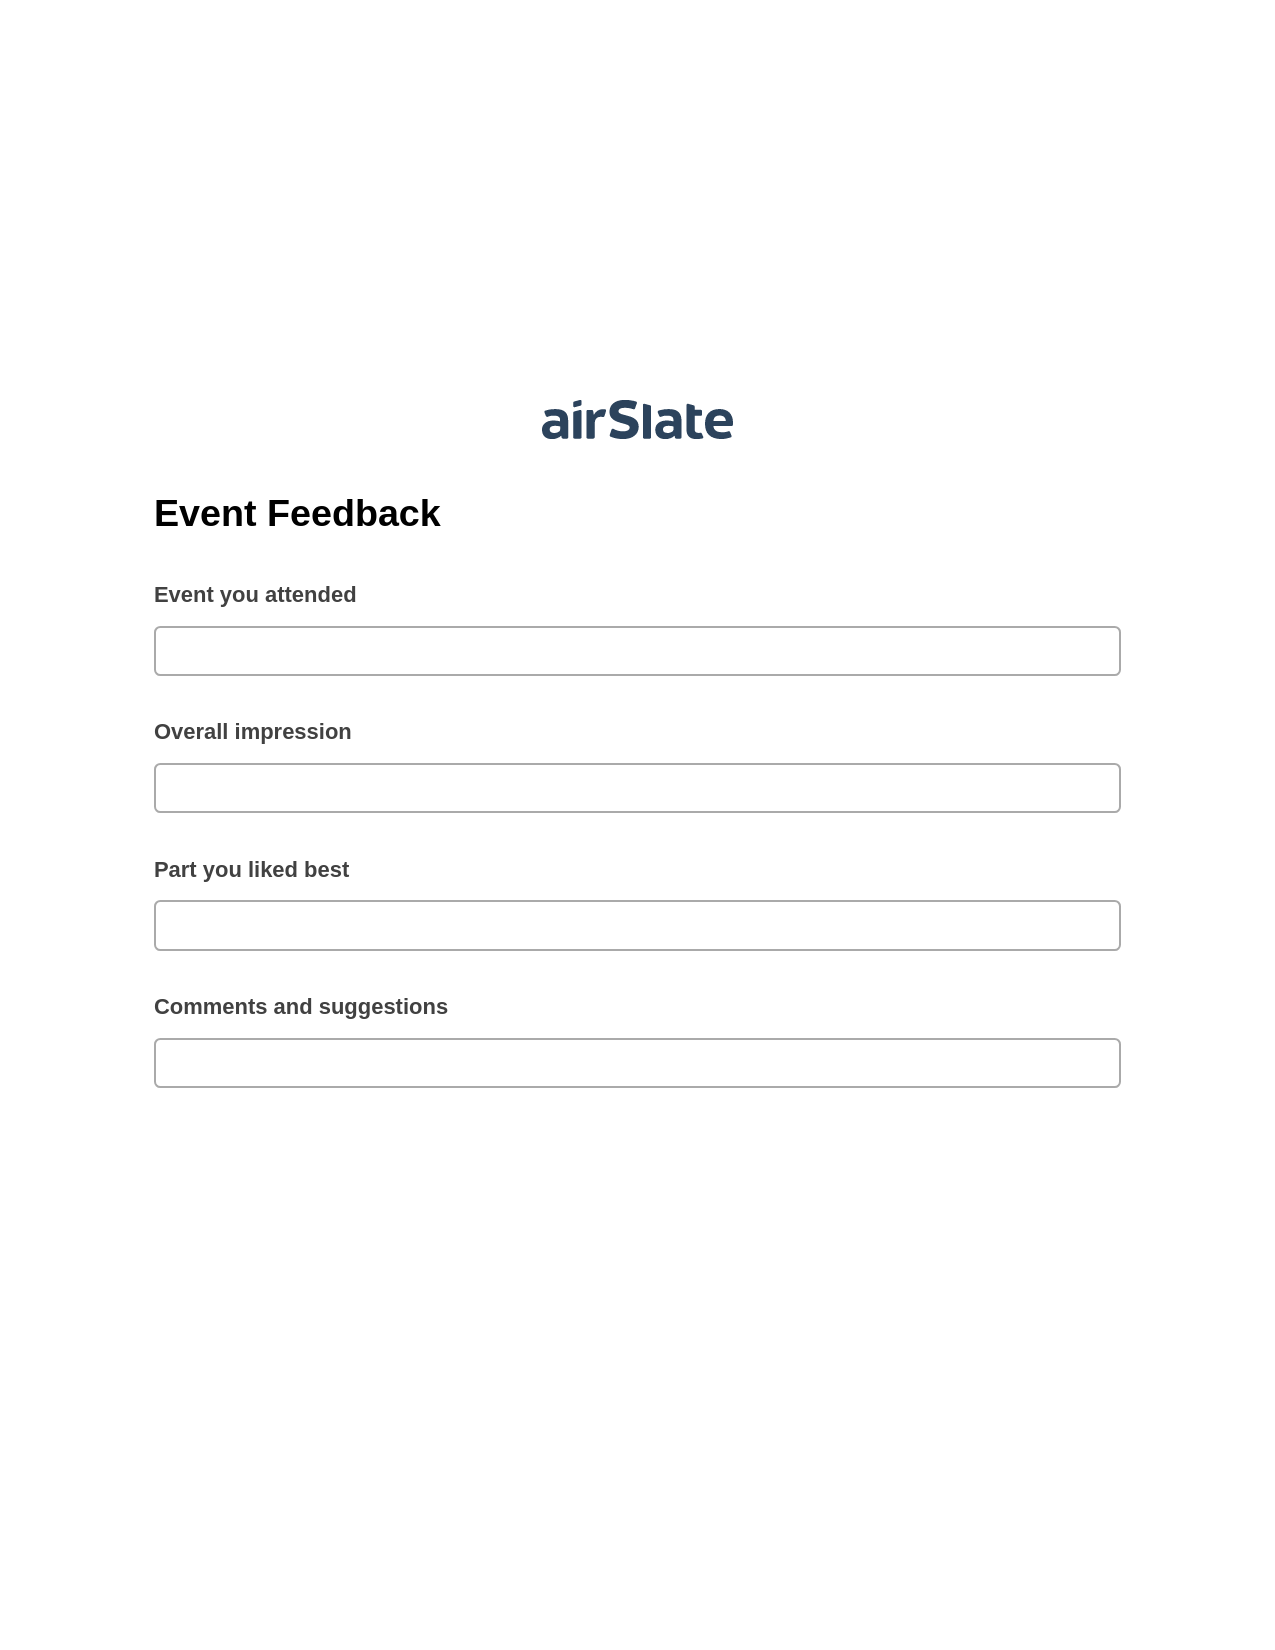 Event Feedback Pre-fill from CSV File Bot, Pre-fill with Custom Data Bot, Export to Smartsheet